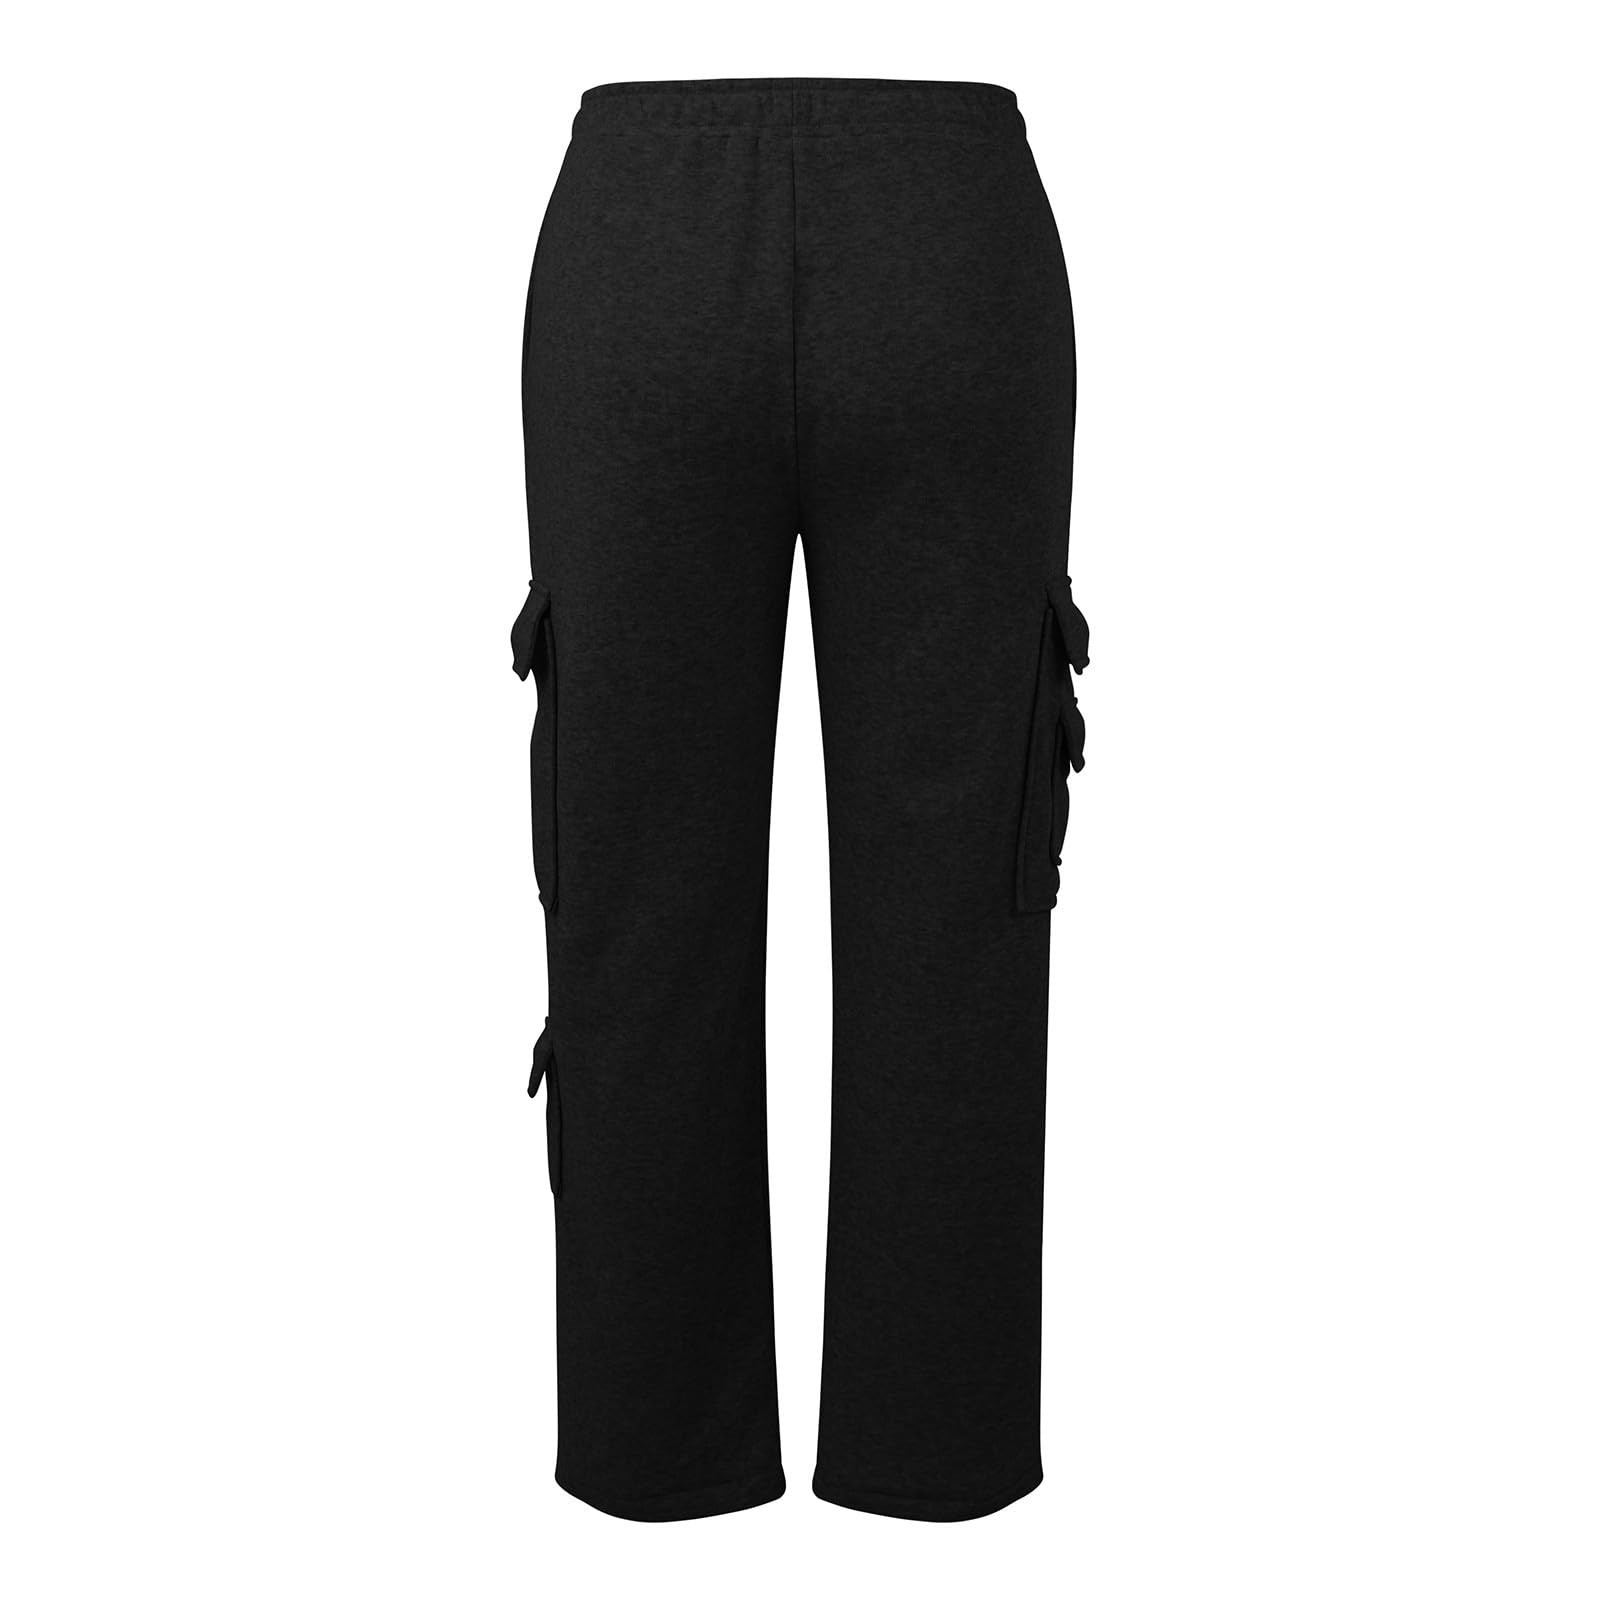 YYDGH Womens Cargo Sweatpants Wide Leg High Waisted Fall Pants for ...